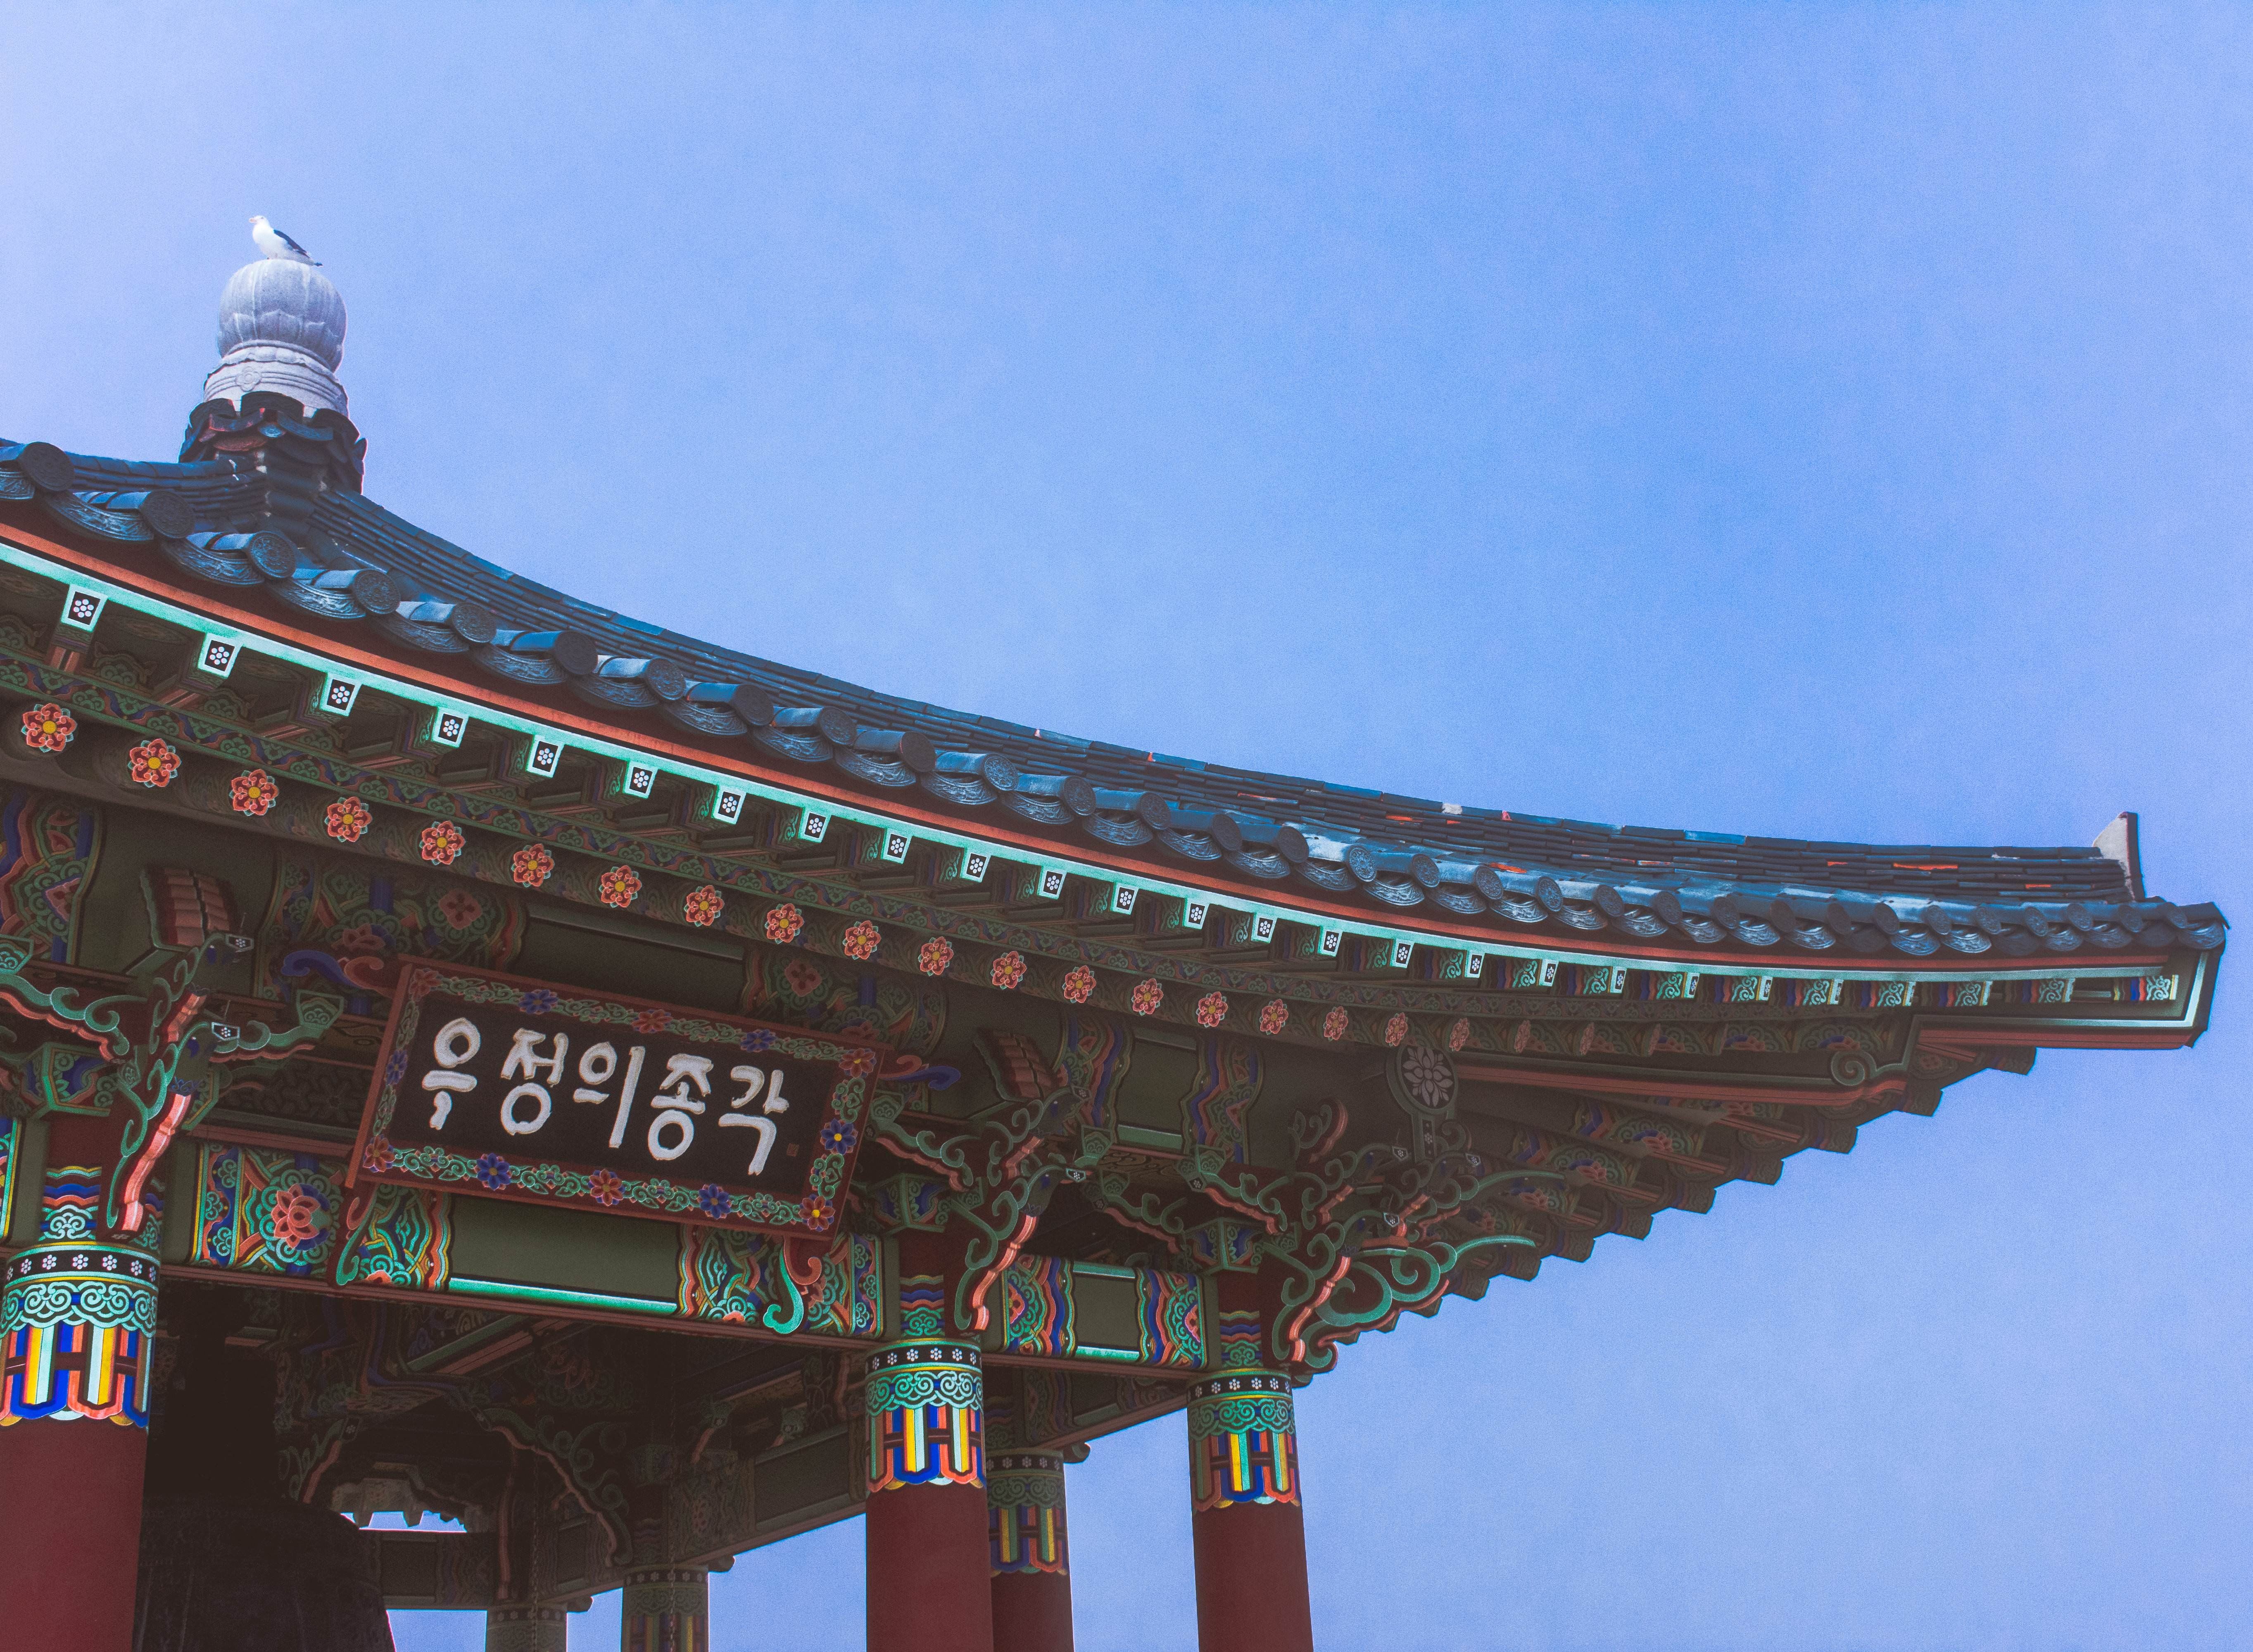 Korean 4K wallpaper for your desktop or mobile screen free and easy to download